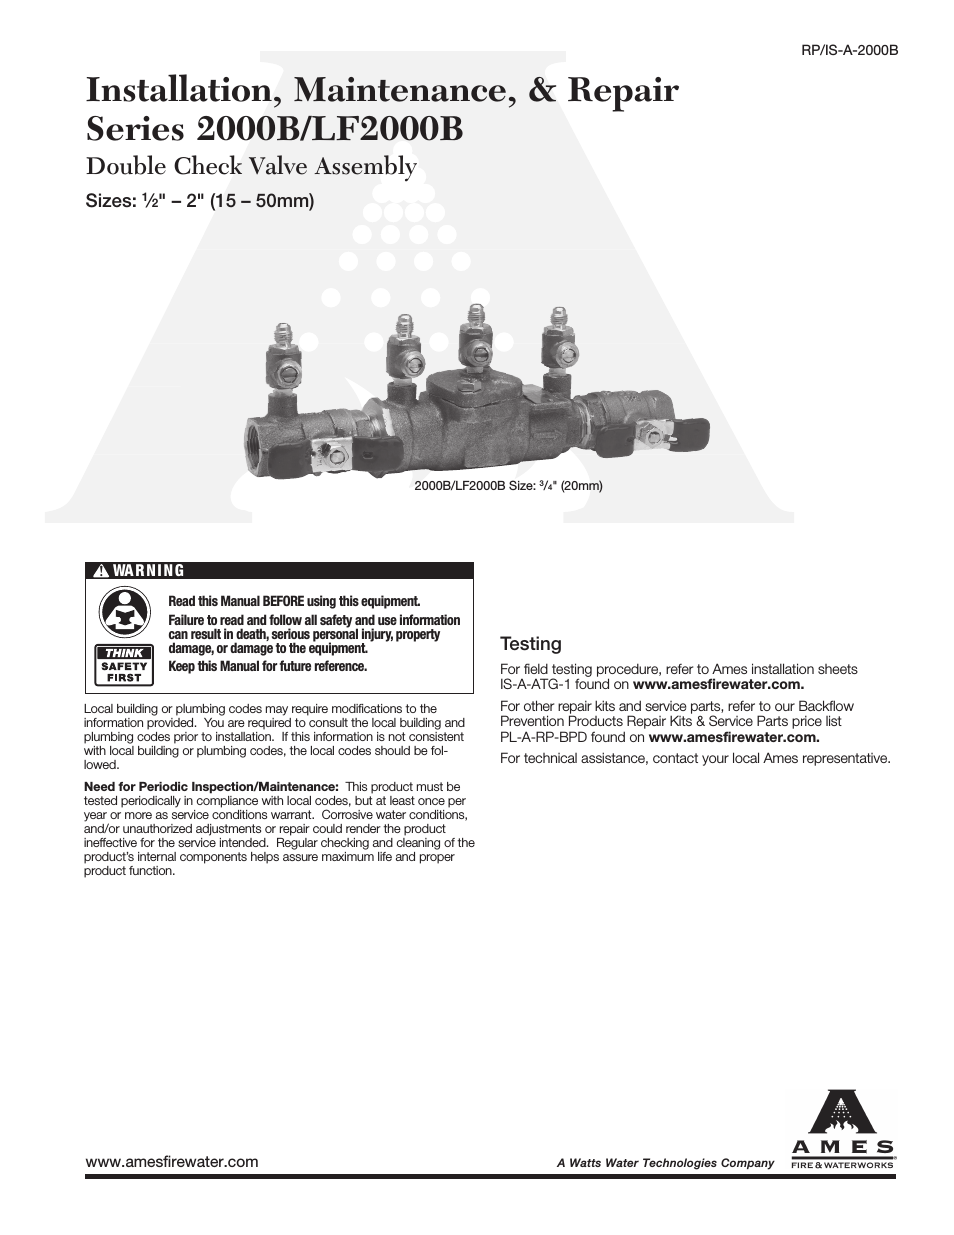 2000B-FP Bronze Double Check Valve Assemblies with Gear Operated Slow Close Isolation Valves